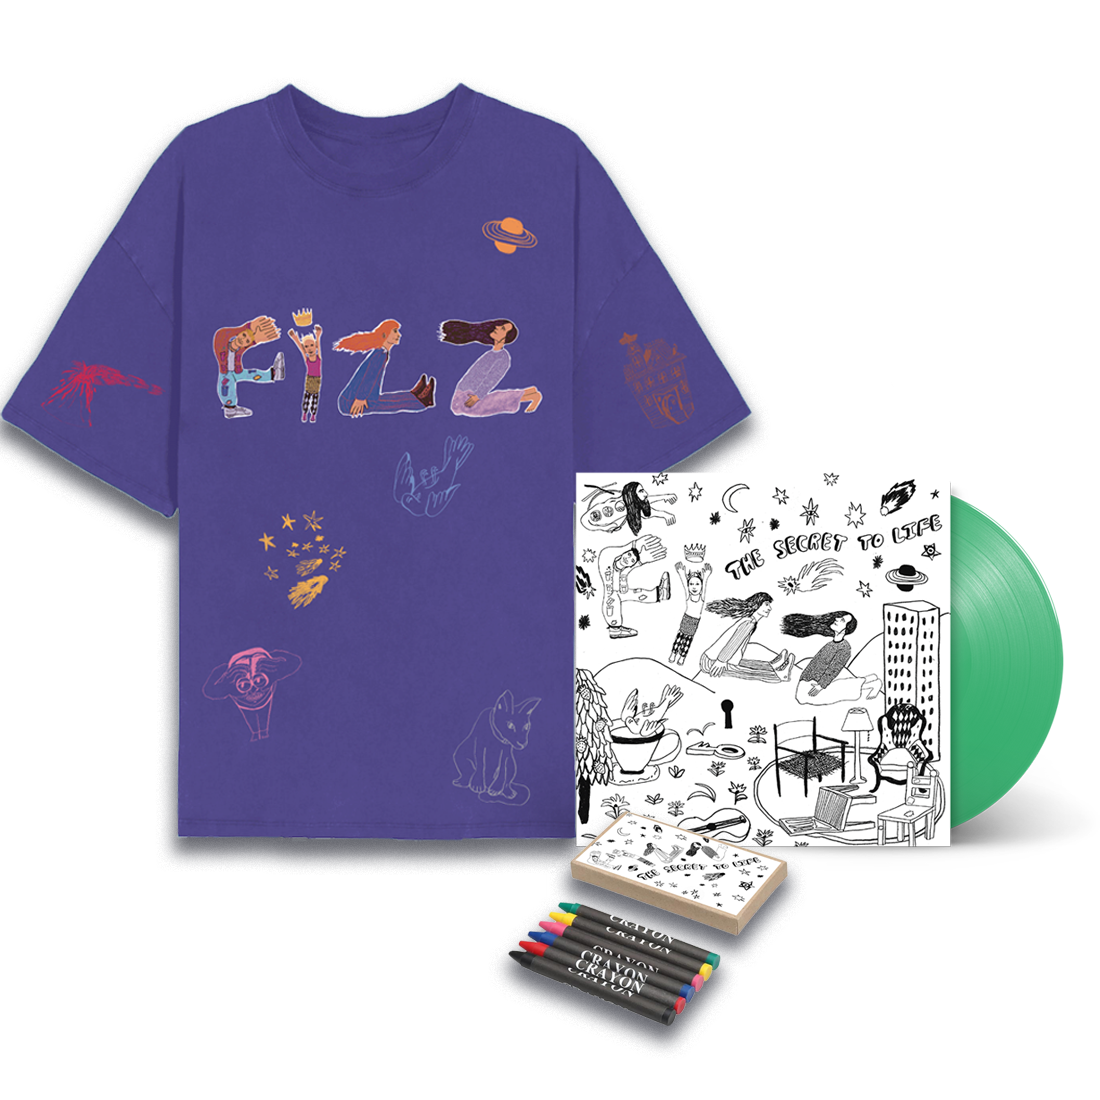 Exclusive The Secret to Life "Colour in" LP, Purple Tee + crayons!